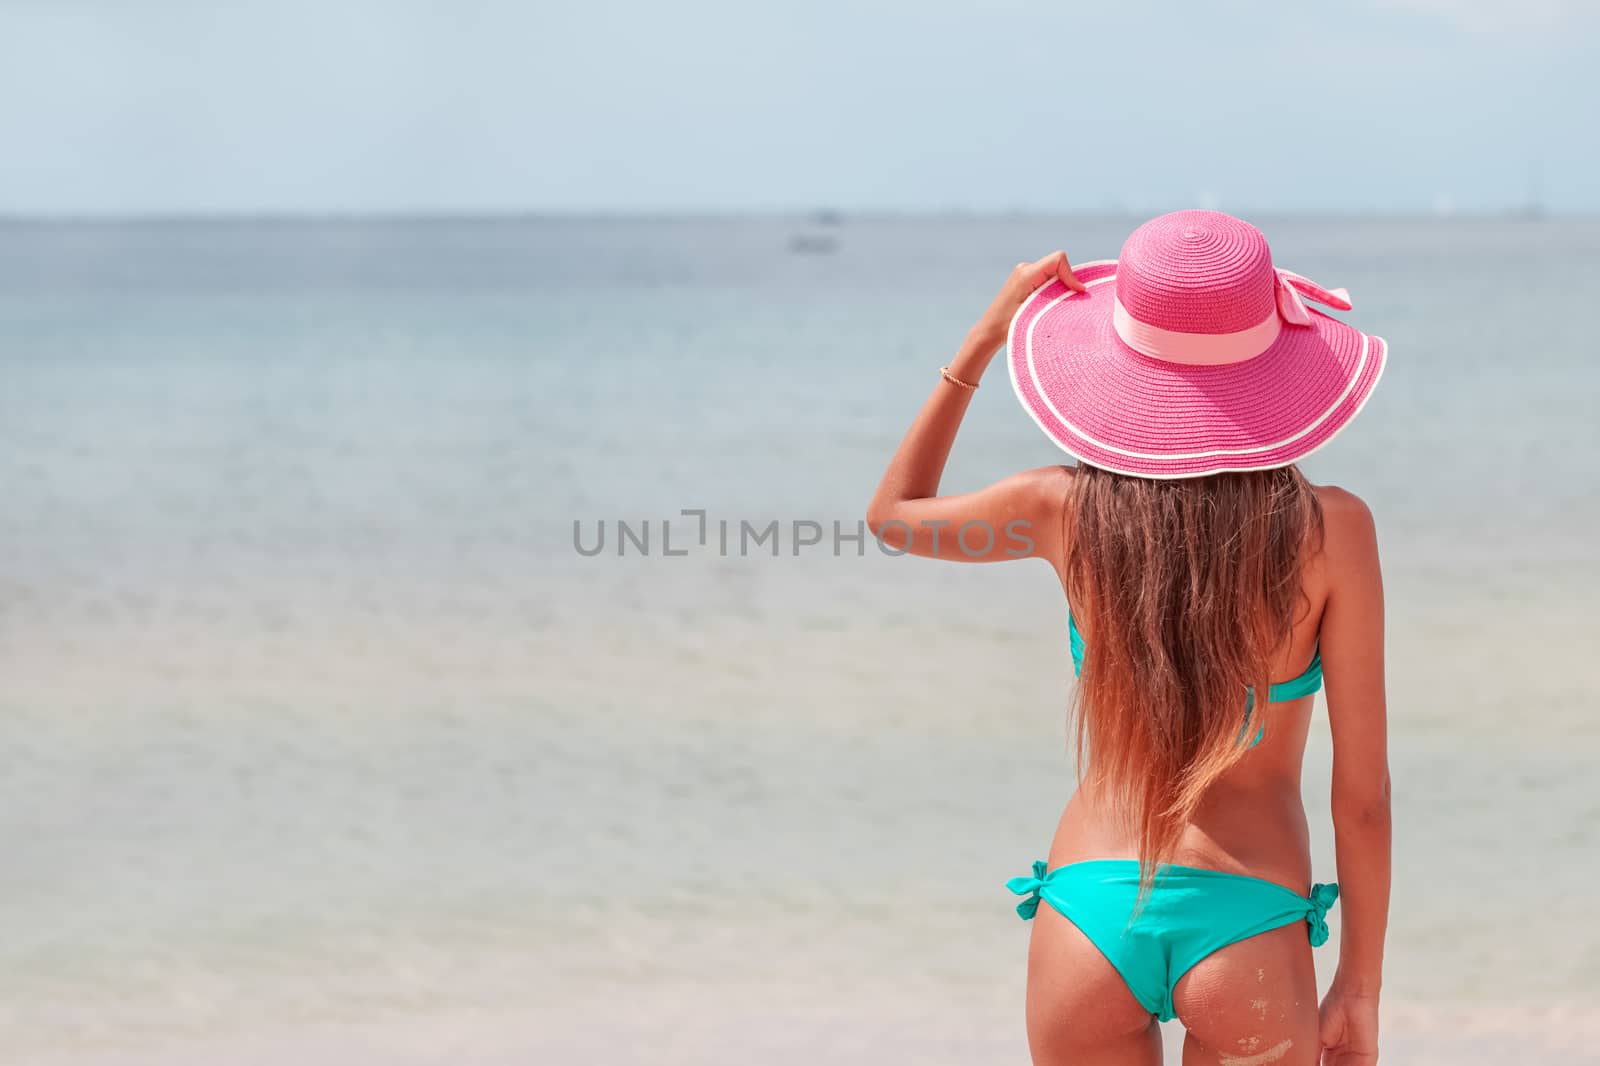 Beach vacation concept. Hot beautiful woman in sunhat and bikini standing enjoying looking view of beach ocean on hot summer day.